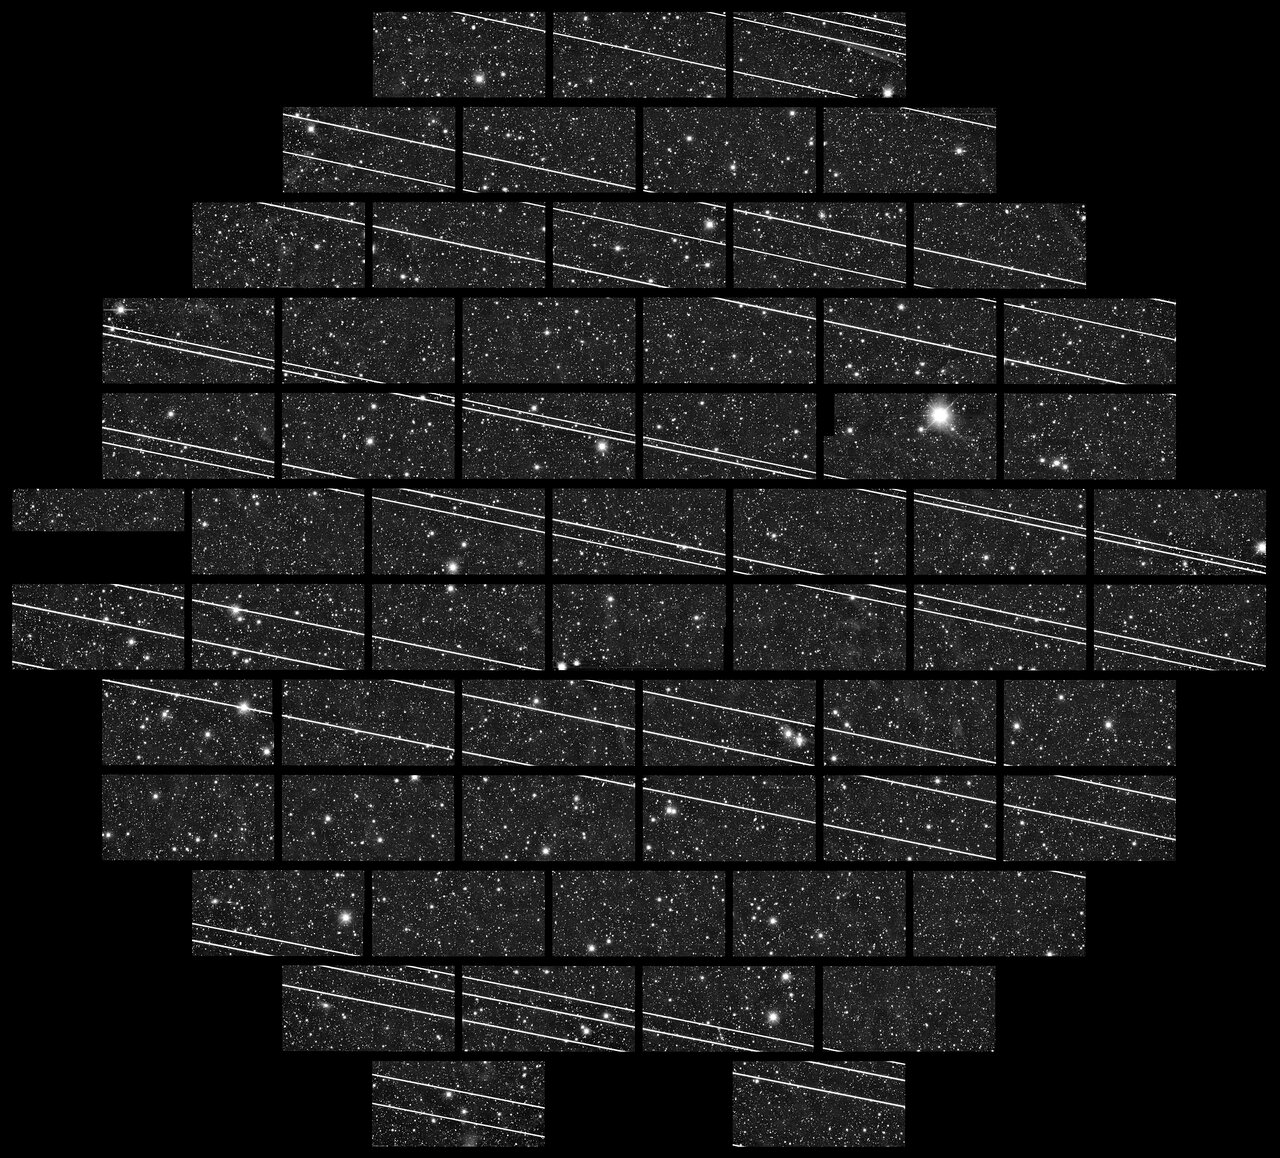 Stars and satellites as seen by the Dark Energy Camera